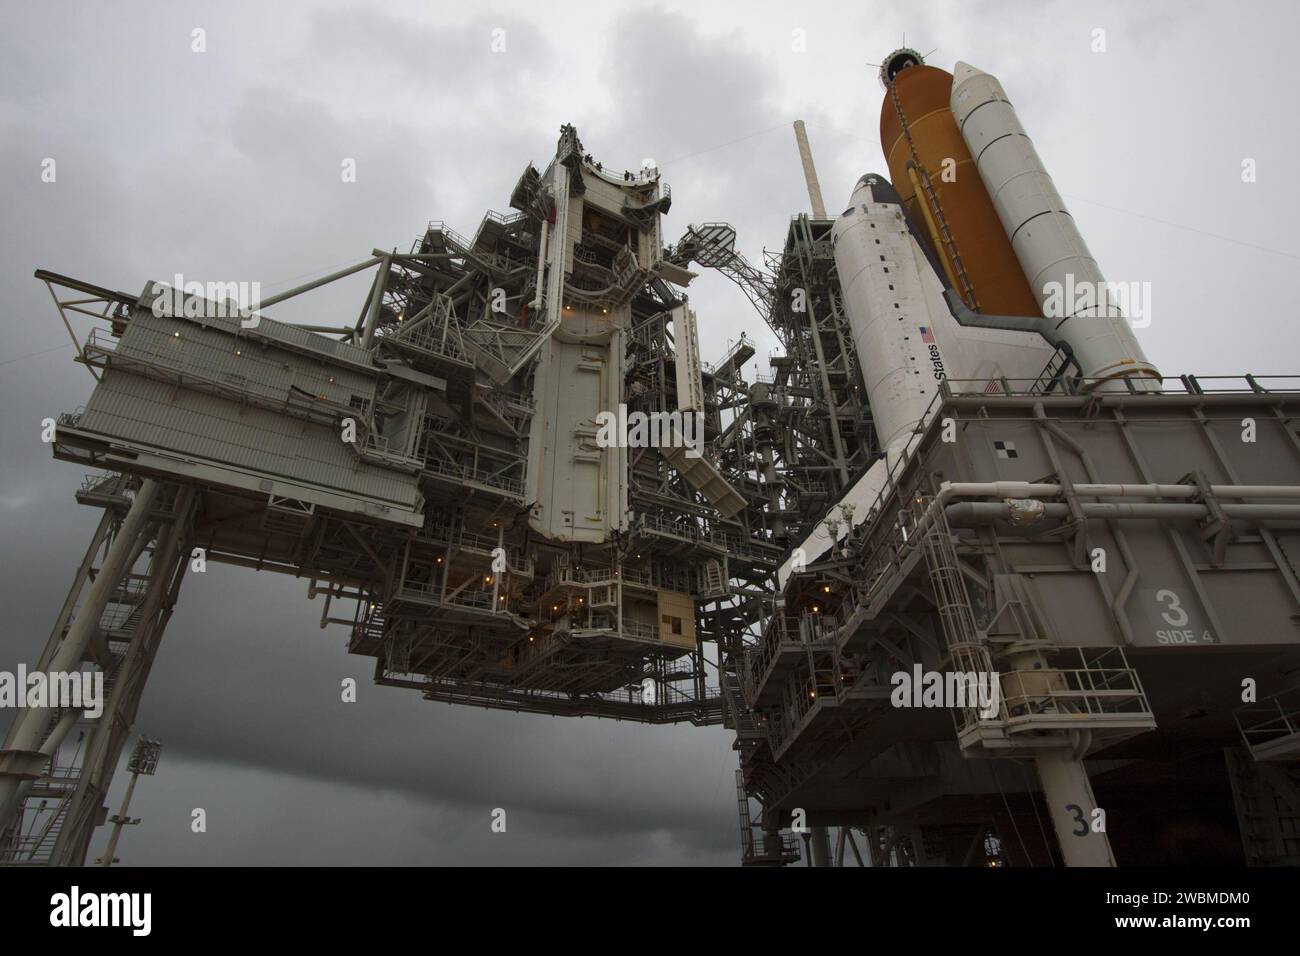 CAPE CANAVERAL, Fla. -- Space shuttle Atlantis is revealed on Launch Pad 39A at NASA's Kennedy Space Center in Florida following the move of the rotating service structure (RSS). The structure provides weather protection and access to the shuttle while it awaits liftoff on the pad. RSS 'rollback' marks a major milestone in Atlantis' STS-135 mission countdown.  Atlantis and its crew of four; Commander Chris Ferguson, Pilot Doug Hurley and Mission Specialists Sandy Magnus and Rex Walheim, are scheduled to lift off at 11:26 a.m. EDT on July 8 to deliver the Raffaello multi-purpose logistics modul Stock Photo